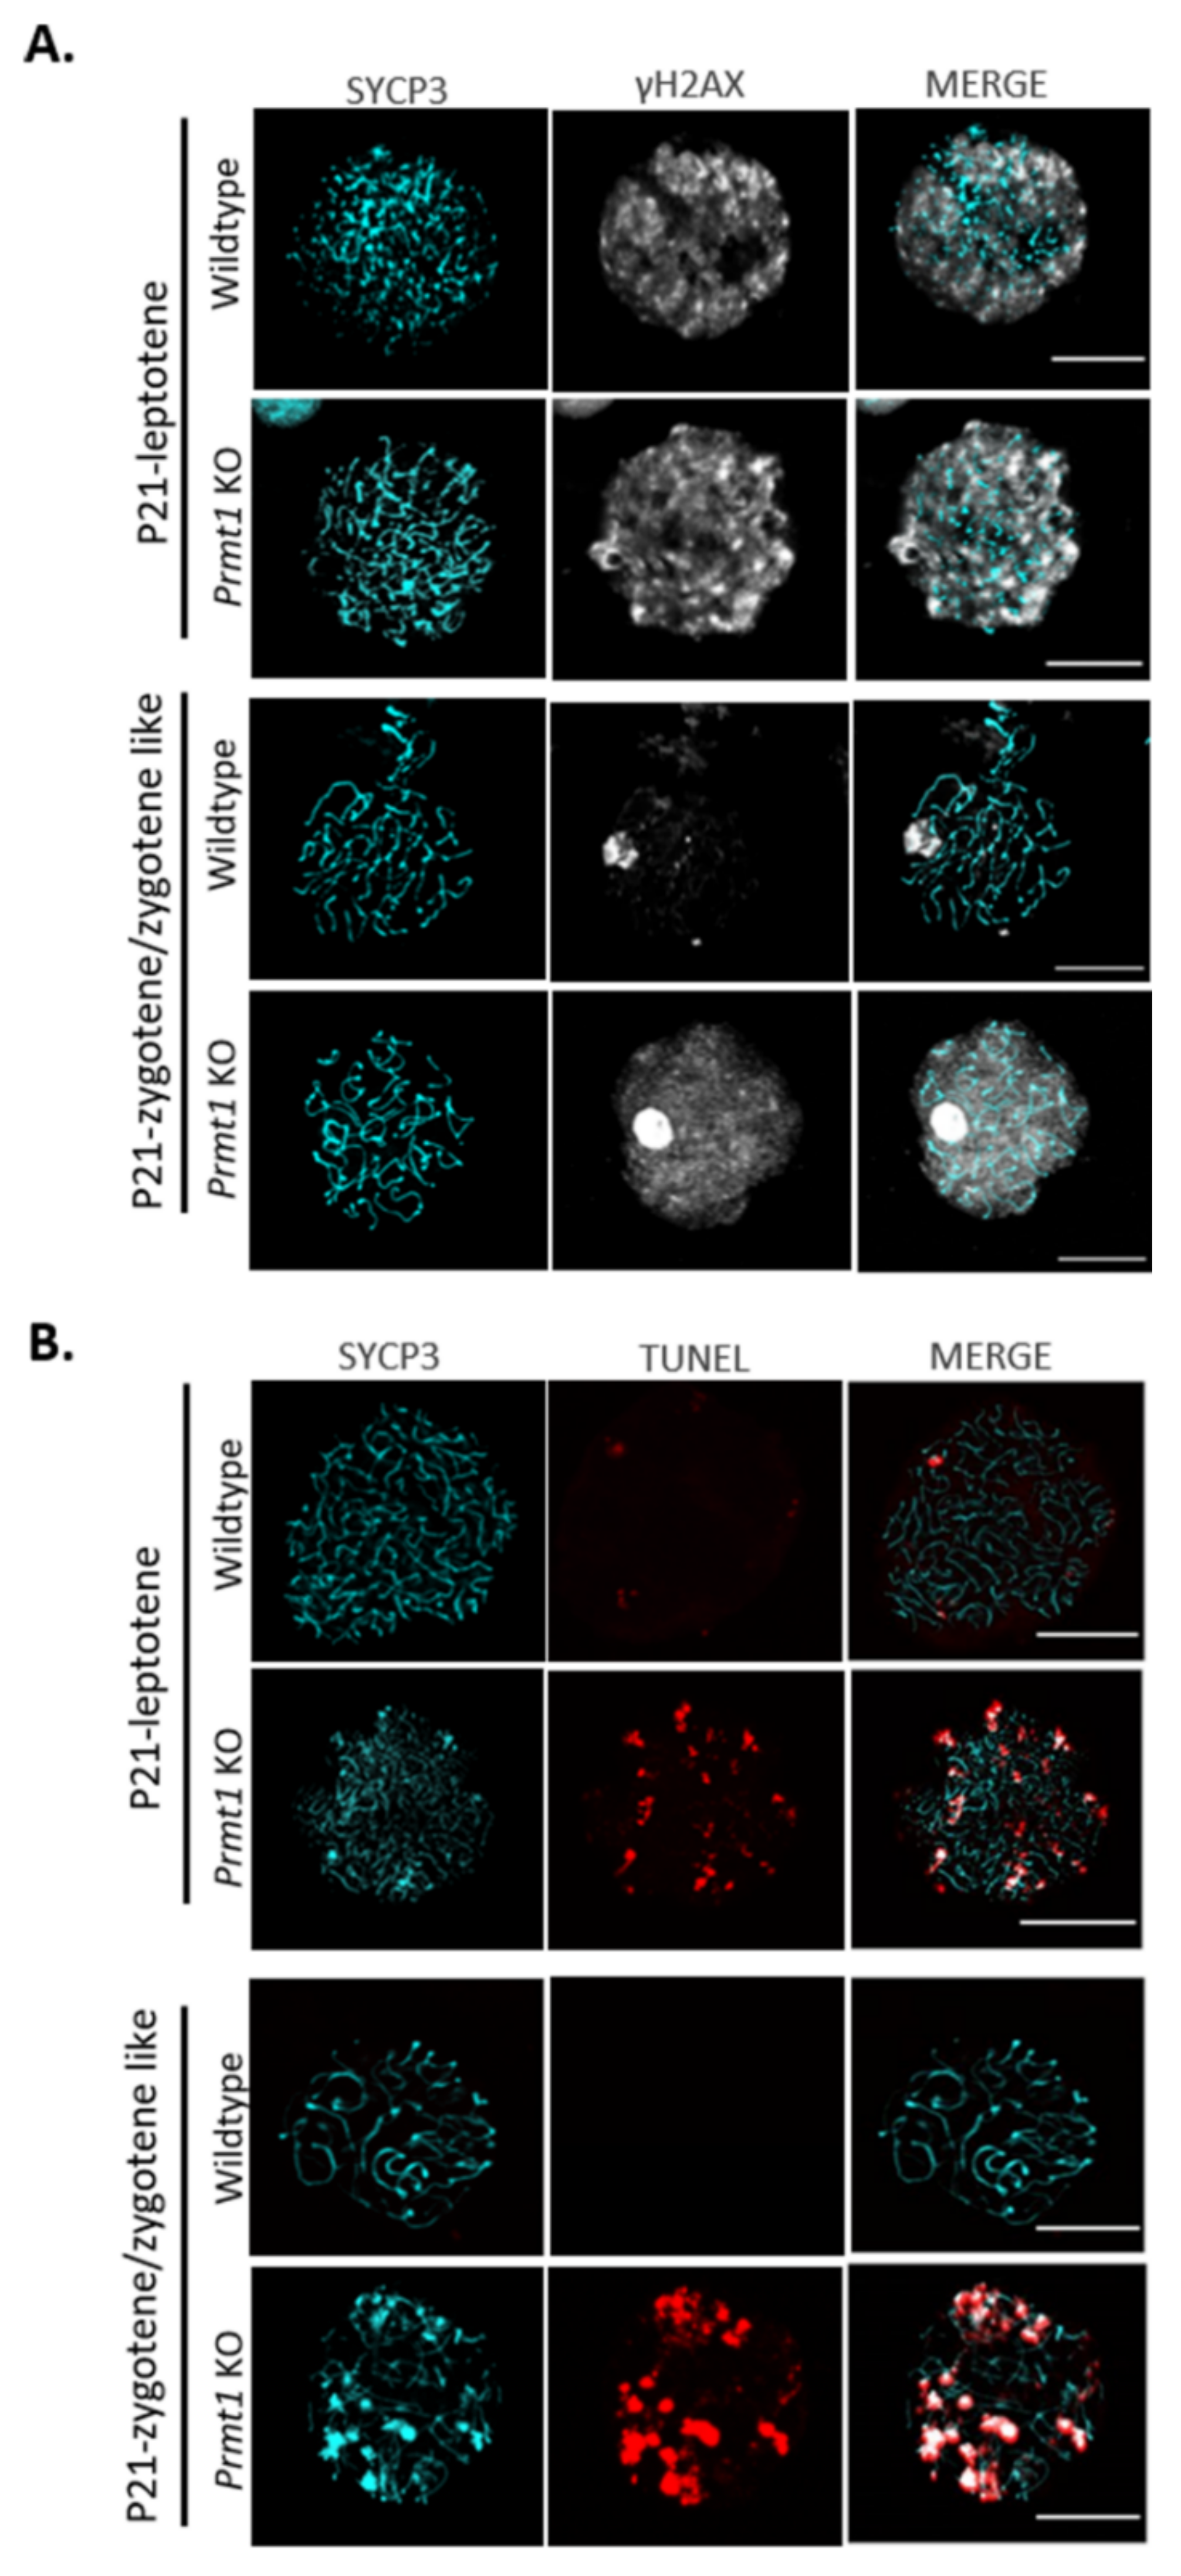 IJMS | Free Full-Text | Protein Arginine Methyltransferase 1 Is Essential  for the Meiosis of Male Germ Cells